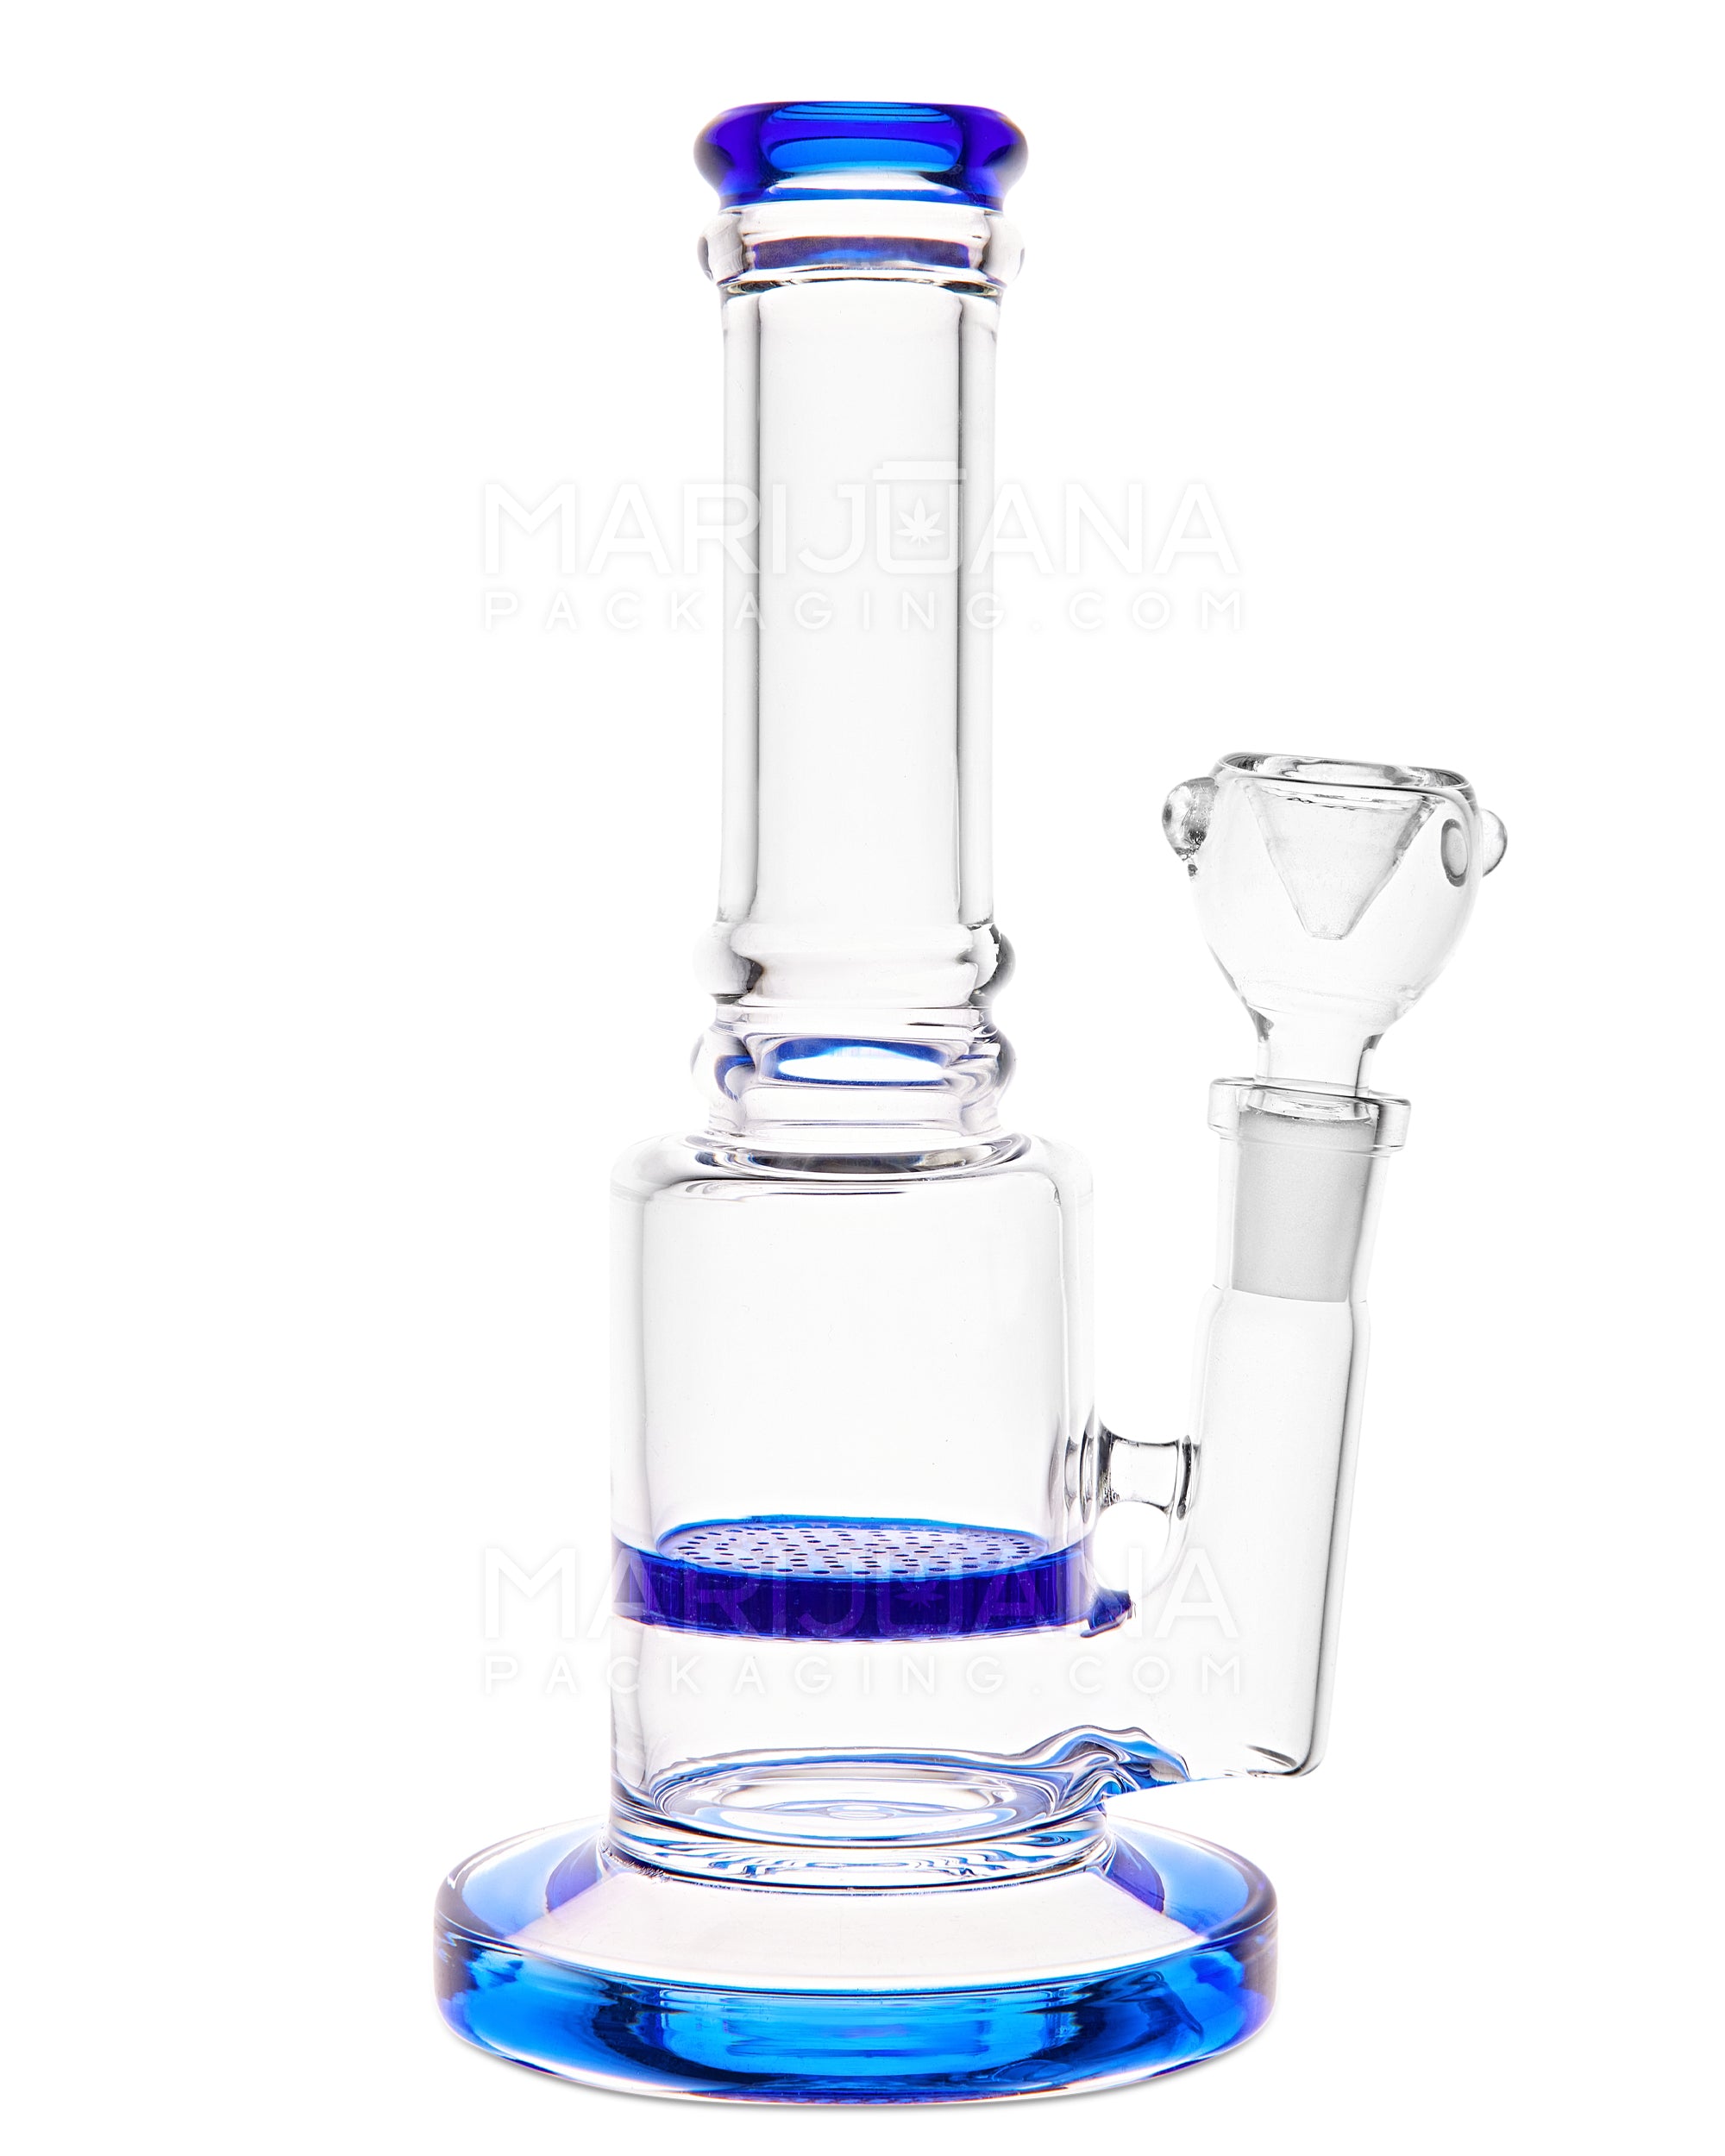 Straight Neck Honeycomb Perc Glass Water Pipe w/ Thick Base | 7.5in Tall - 14mm Bowl - Blue - 1